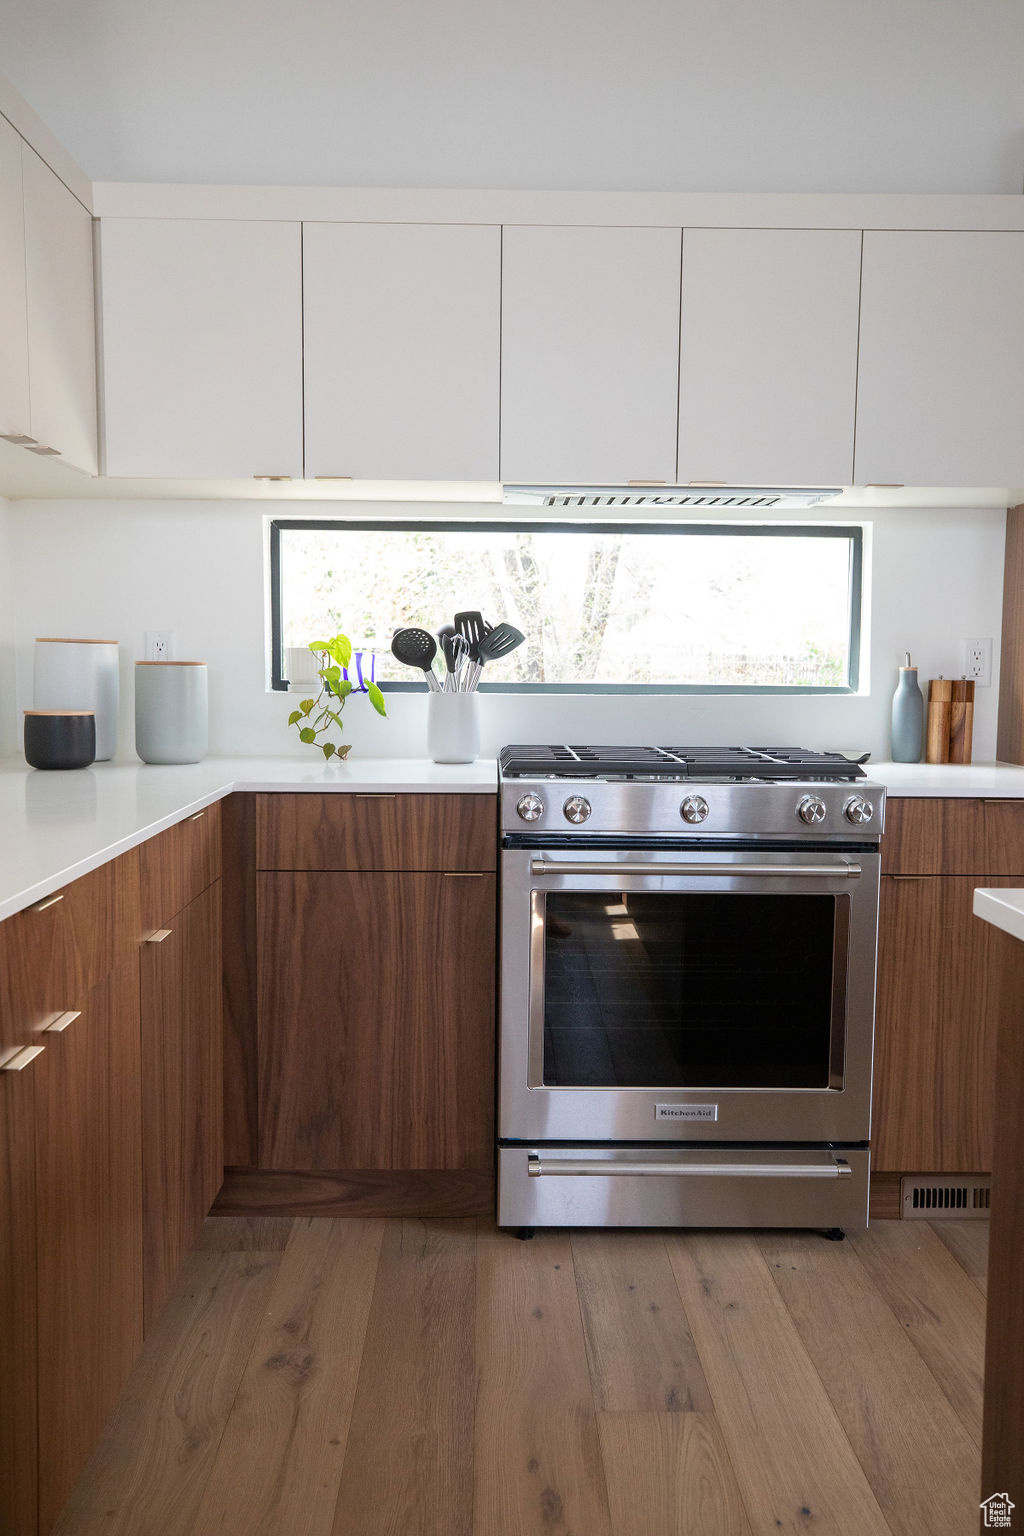 Kitchen with stainless steel stove, wood-type flooring, and white cabinets